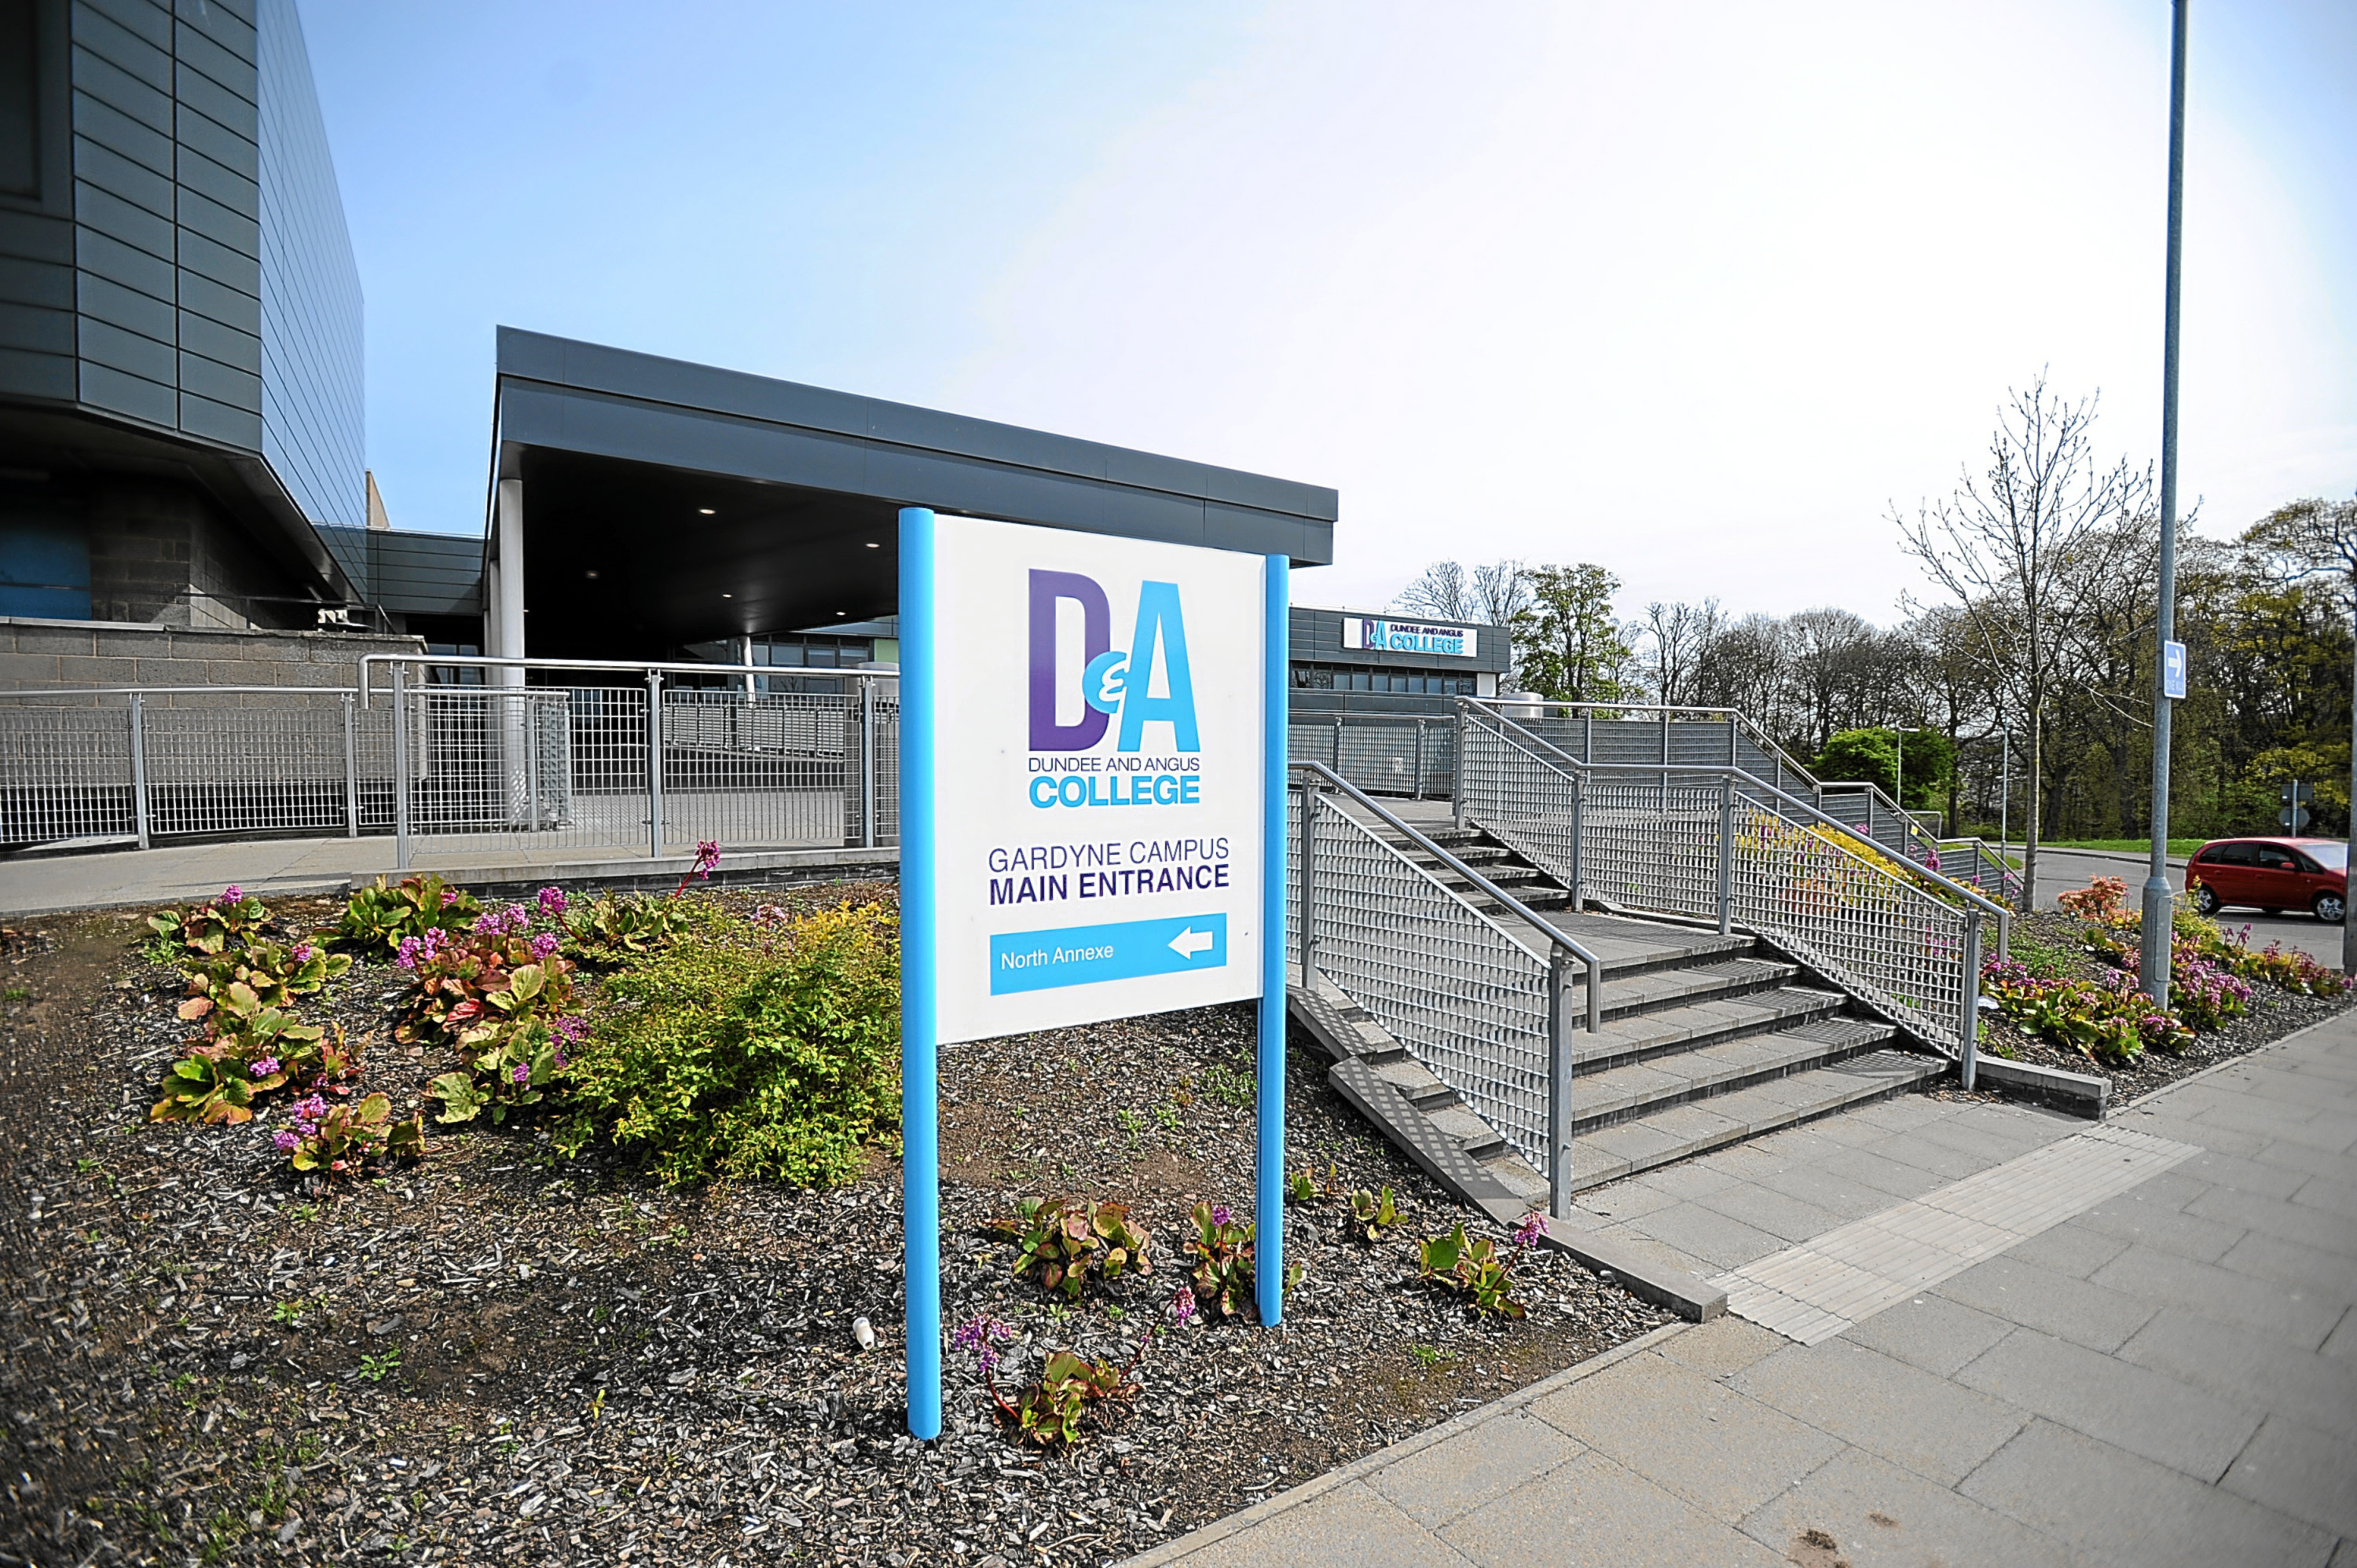 The D&A College apprenticeships will be available to school pupils in S4 or above. .